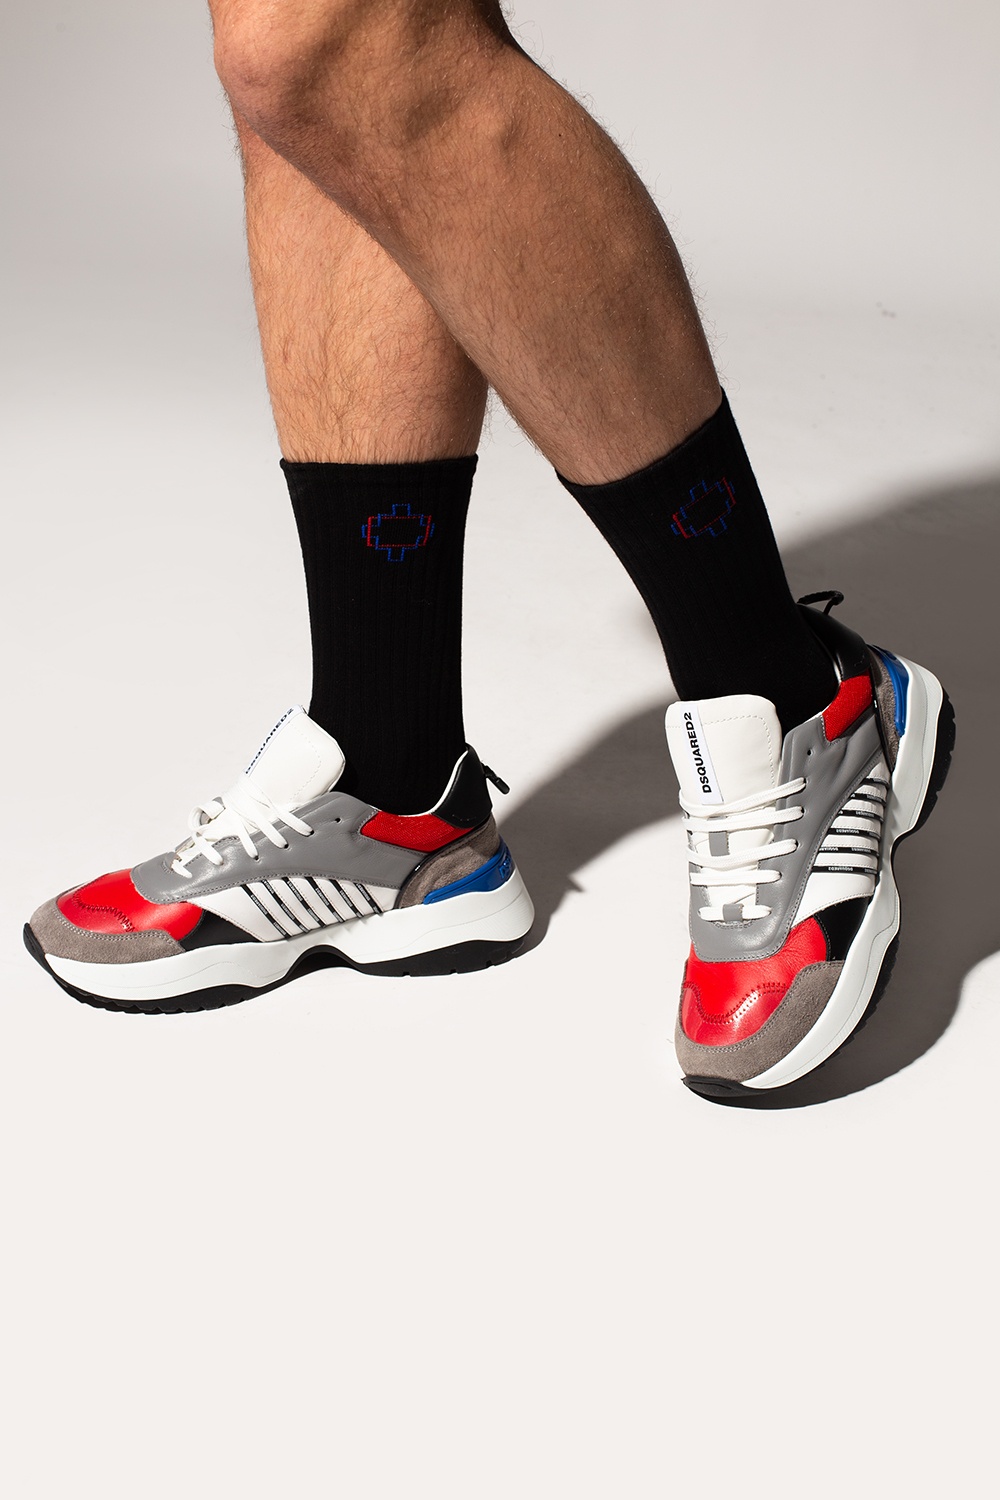 Dsquared2 ‘D24’ sneakers